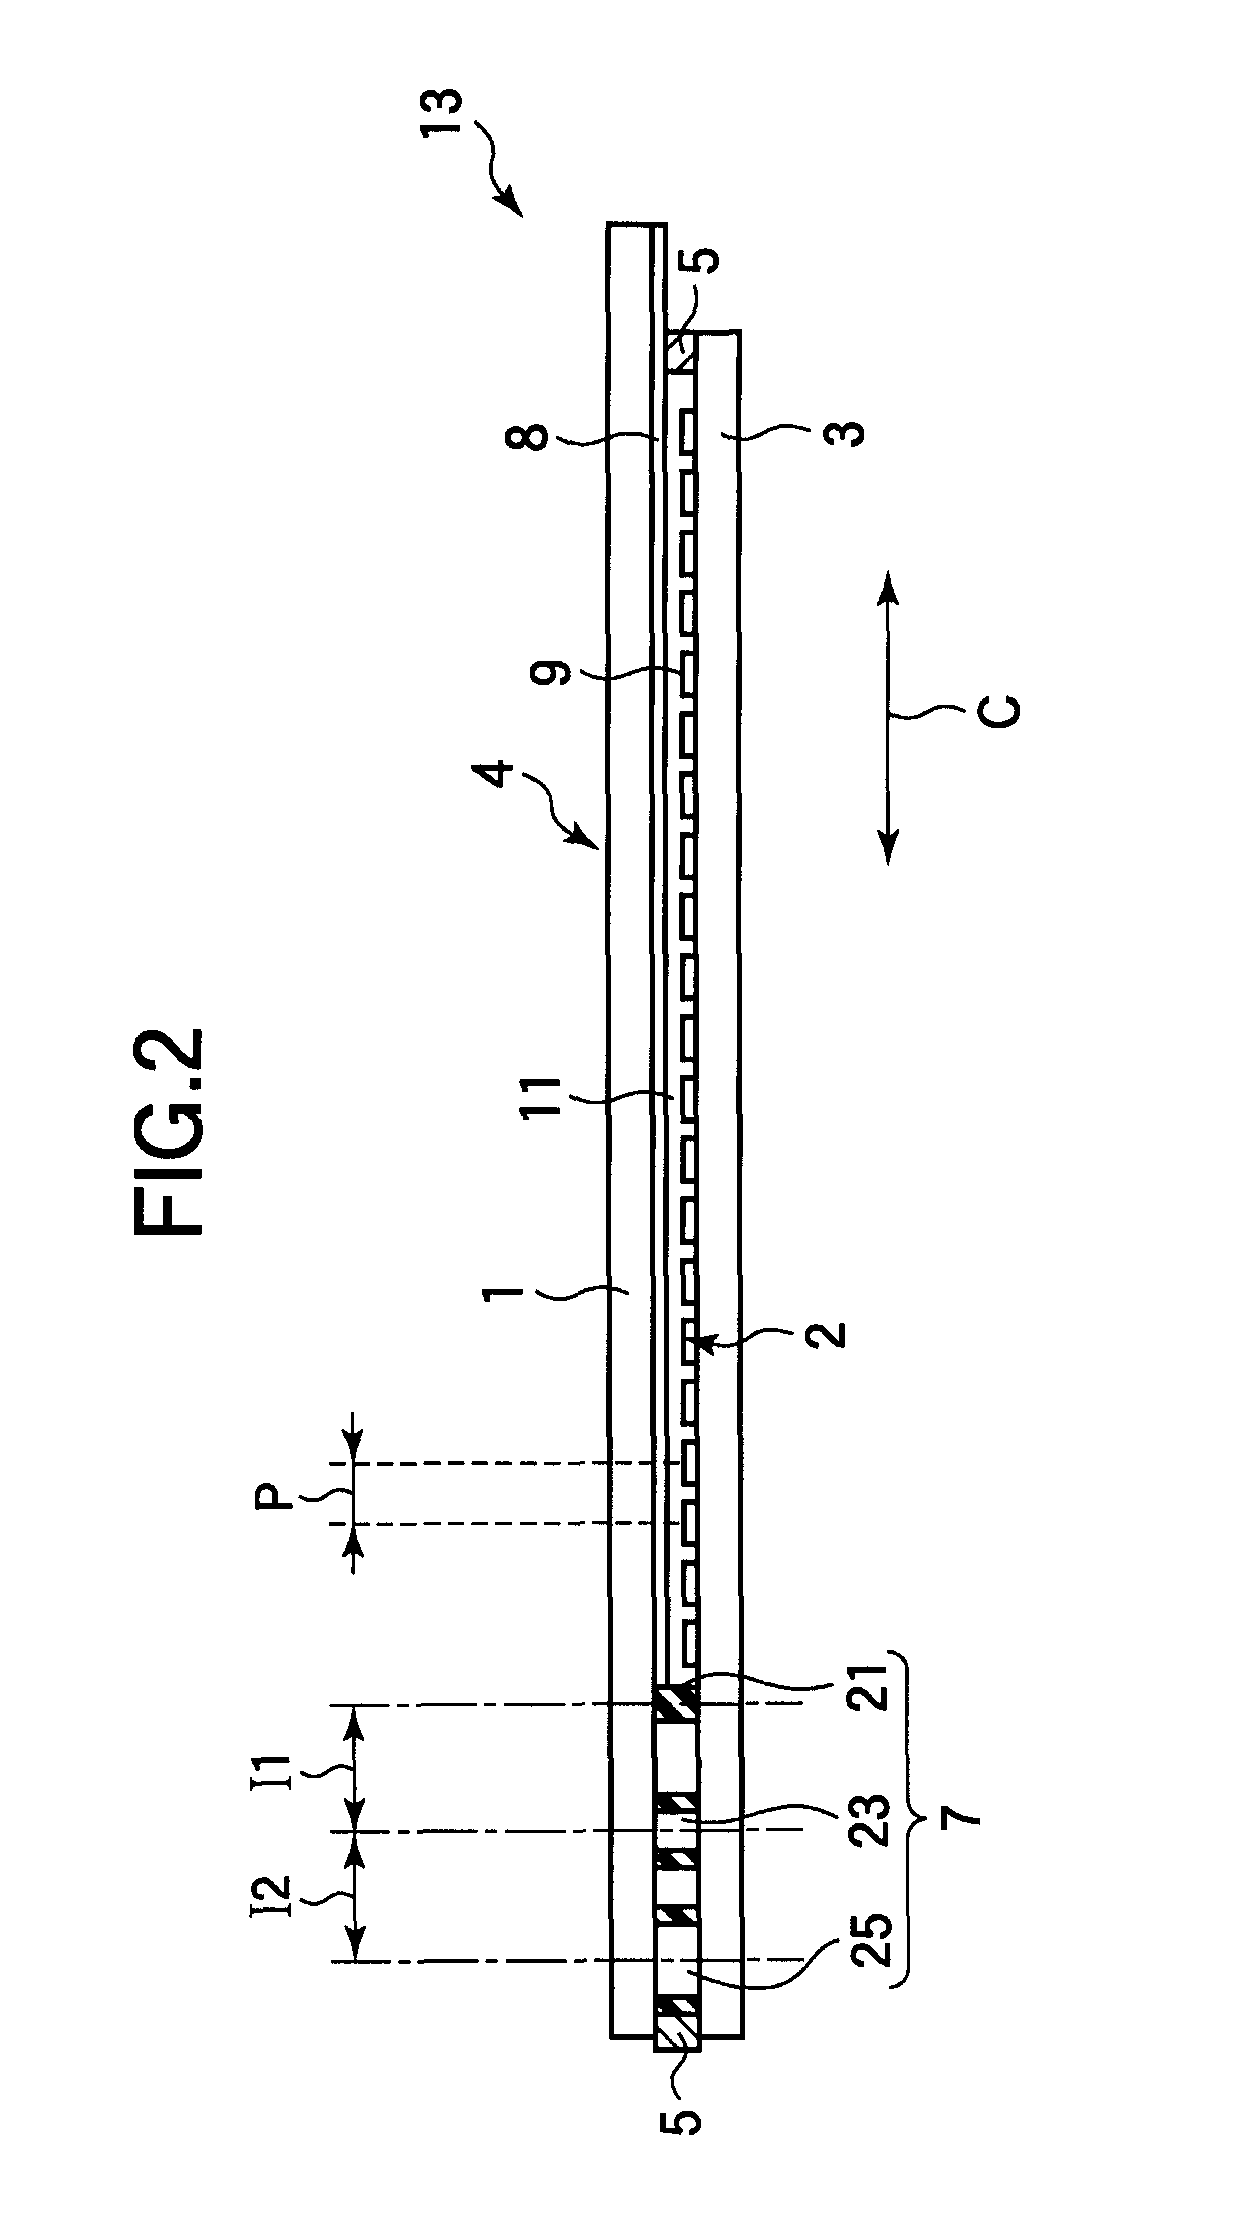 Display panel, multi-layer display element, and method of fabricating the same